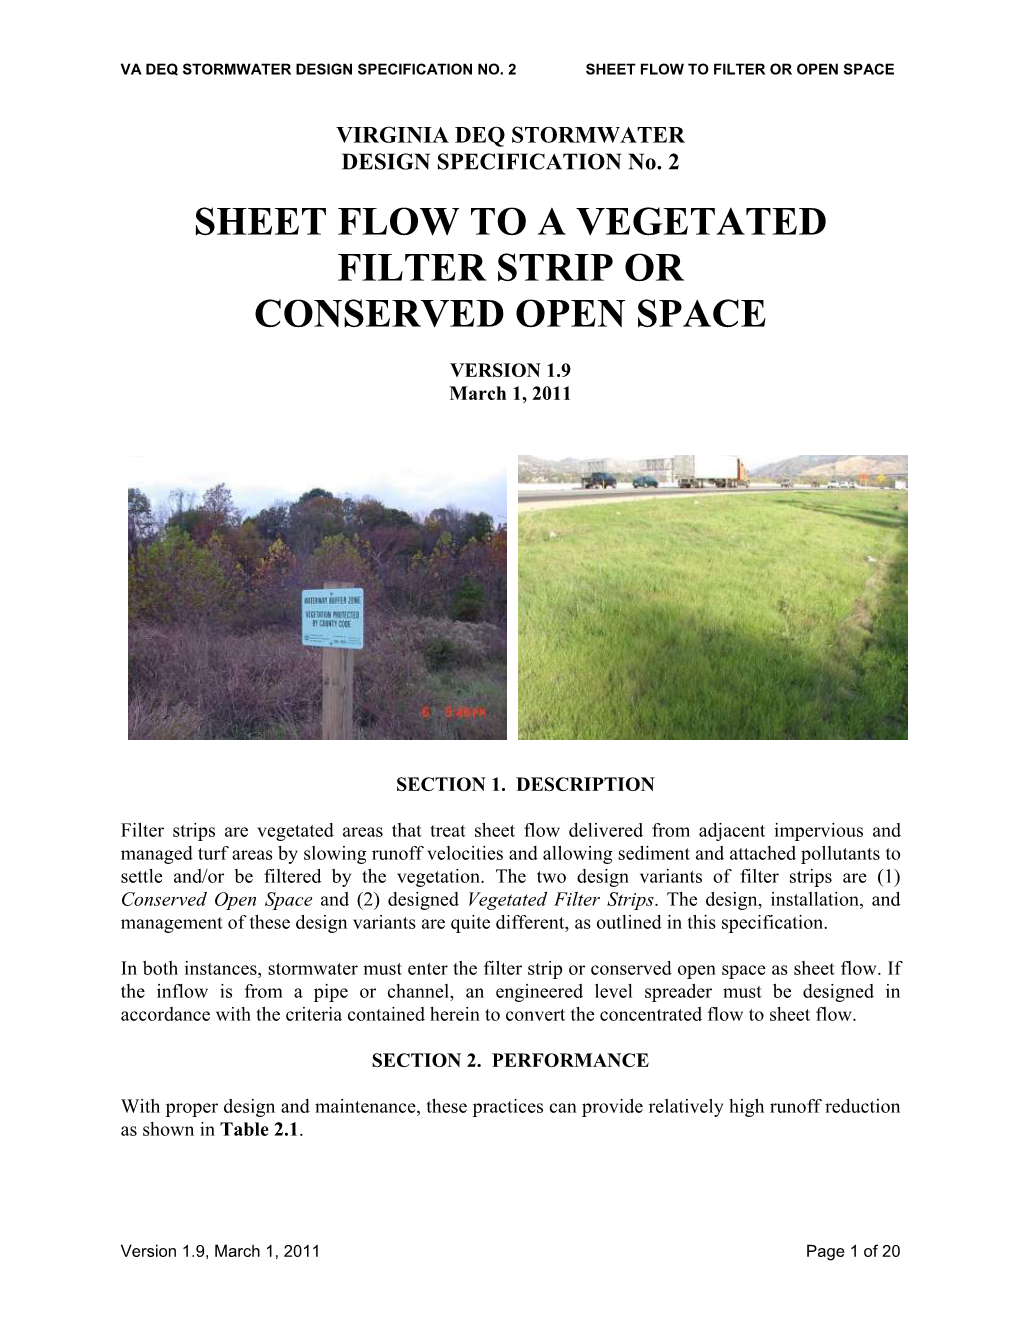 Sheet Flow to a Vegetated Filter Strip Or Conserved Open Space